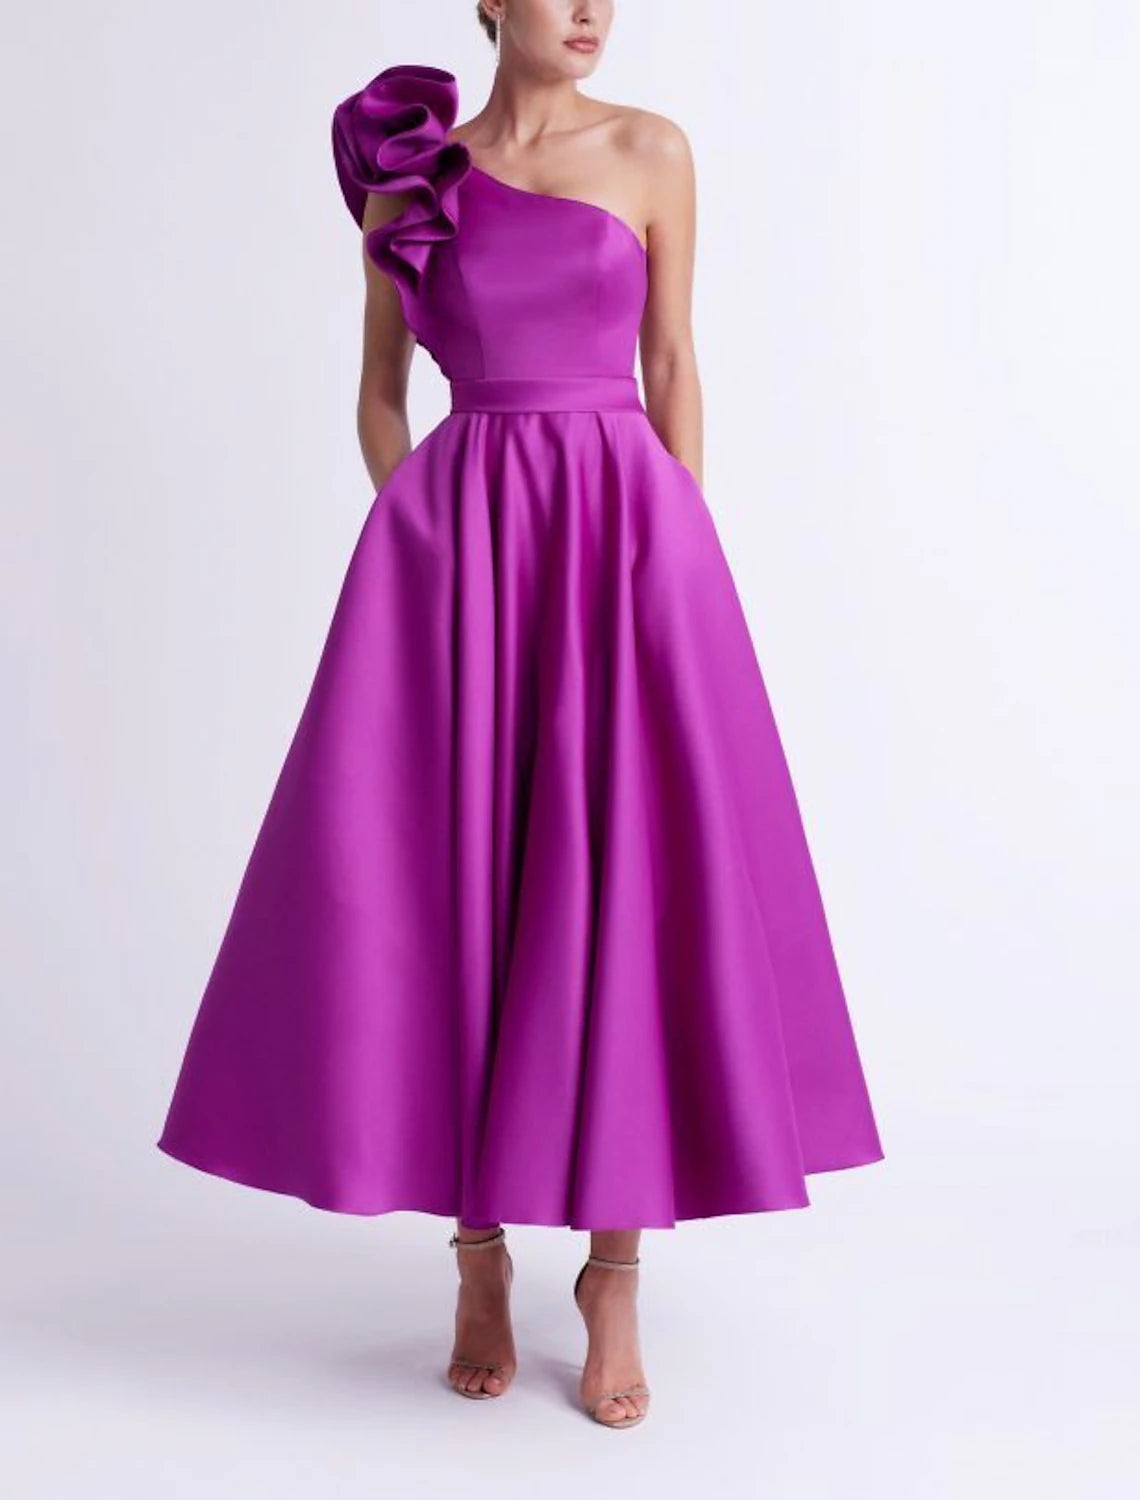 Wholesa A-Line Cocktail Dresses Elegant Dress Wedding Guest Party Wear Ankle Length Sleeveless One Shoulder Pocket Satin with Ruffles